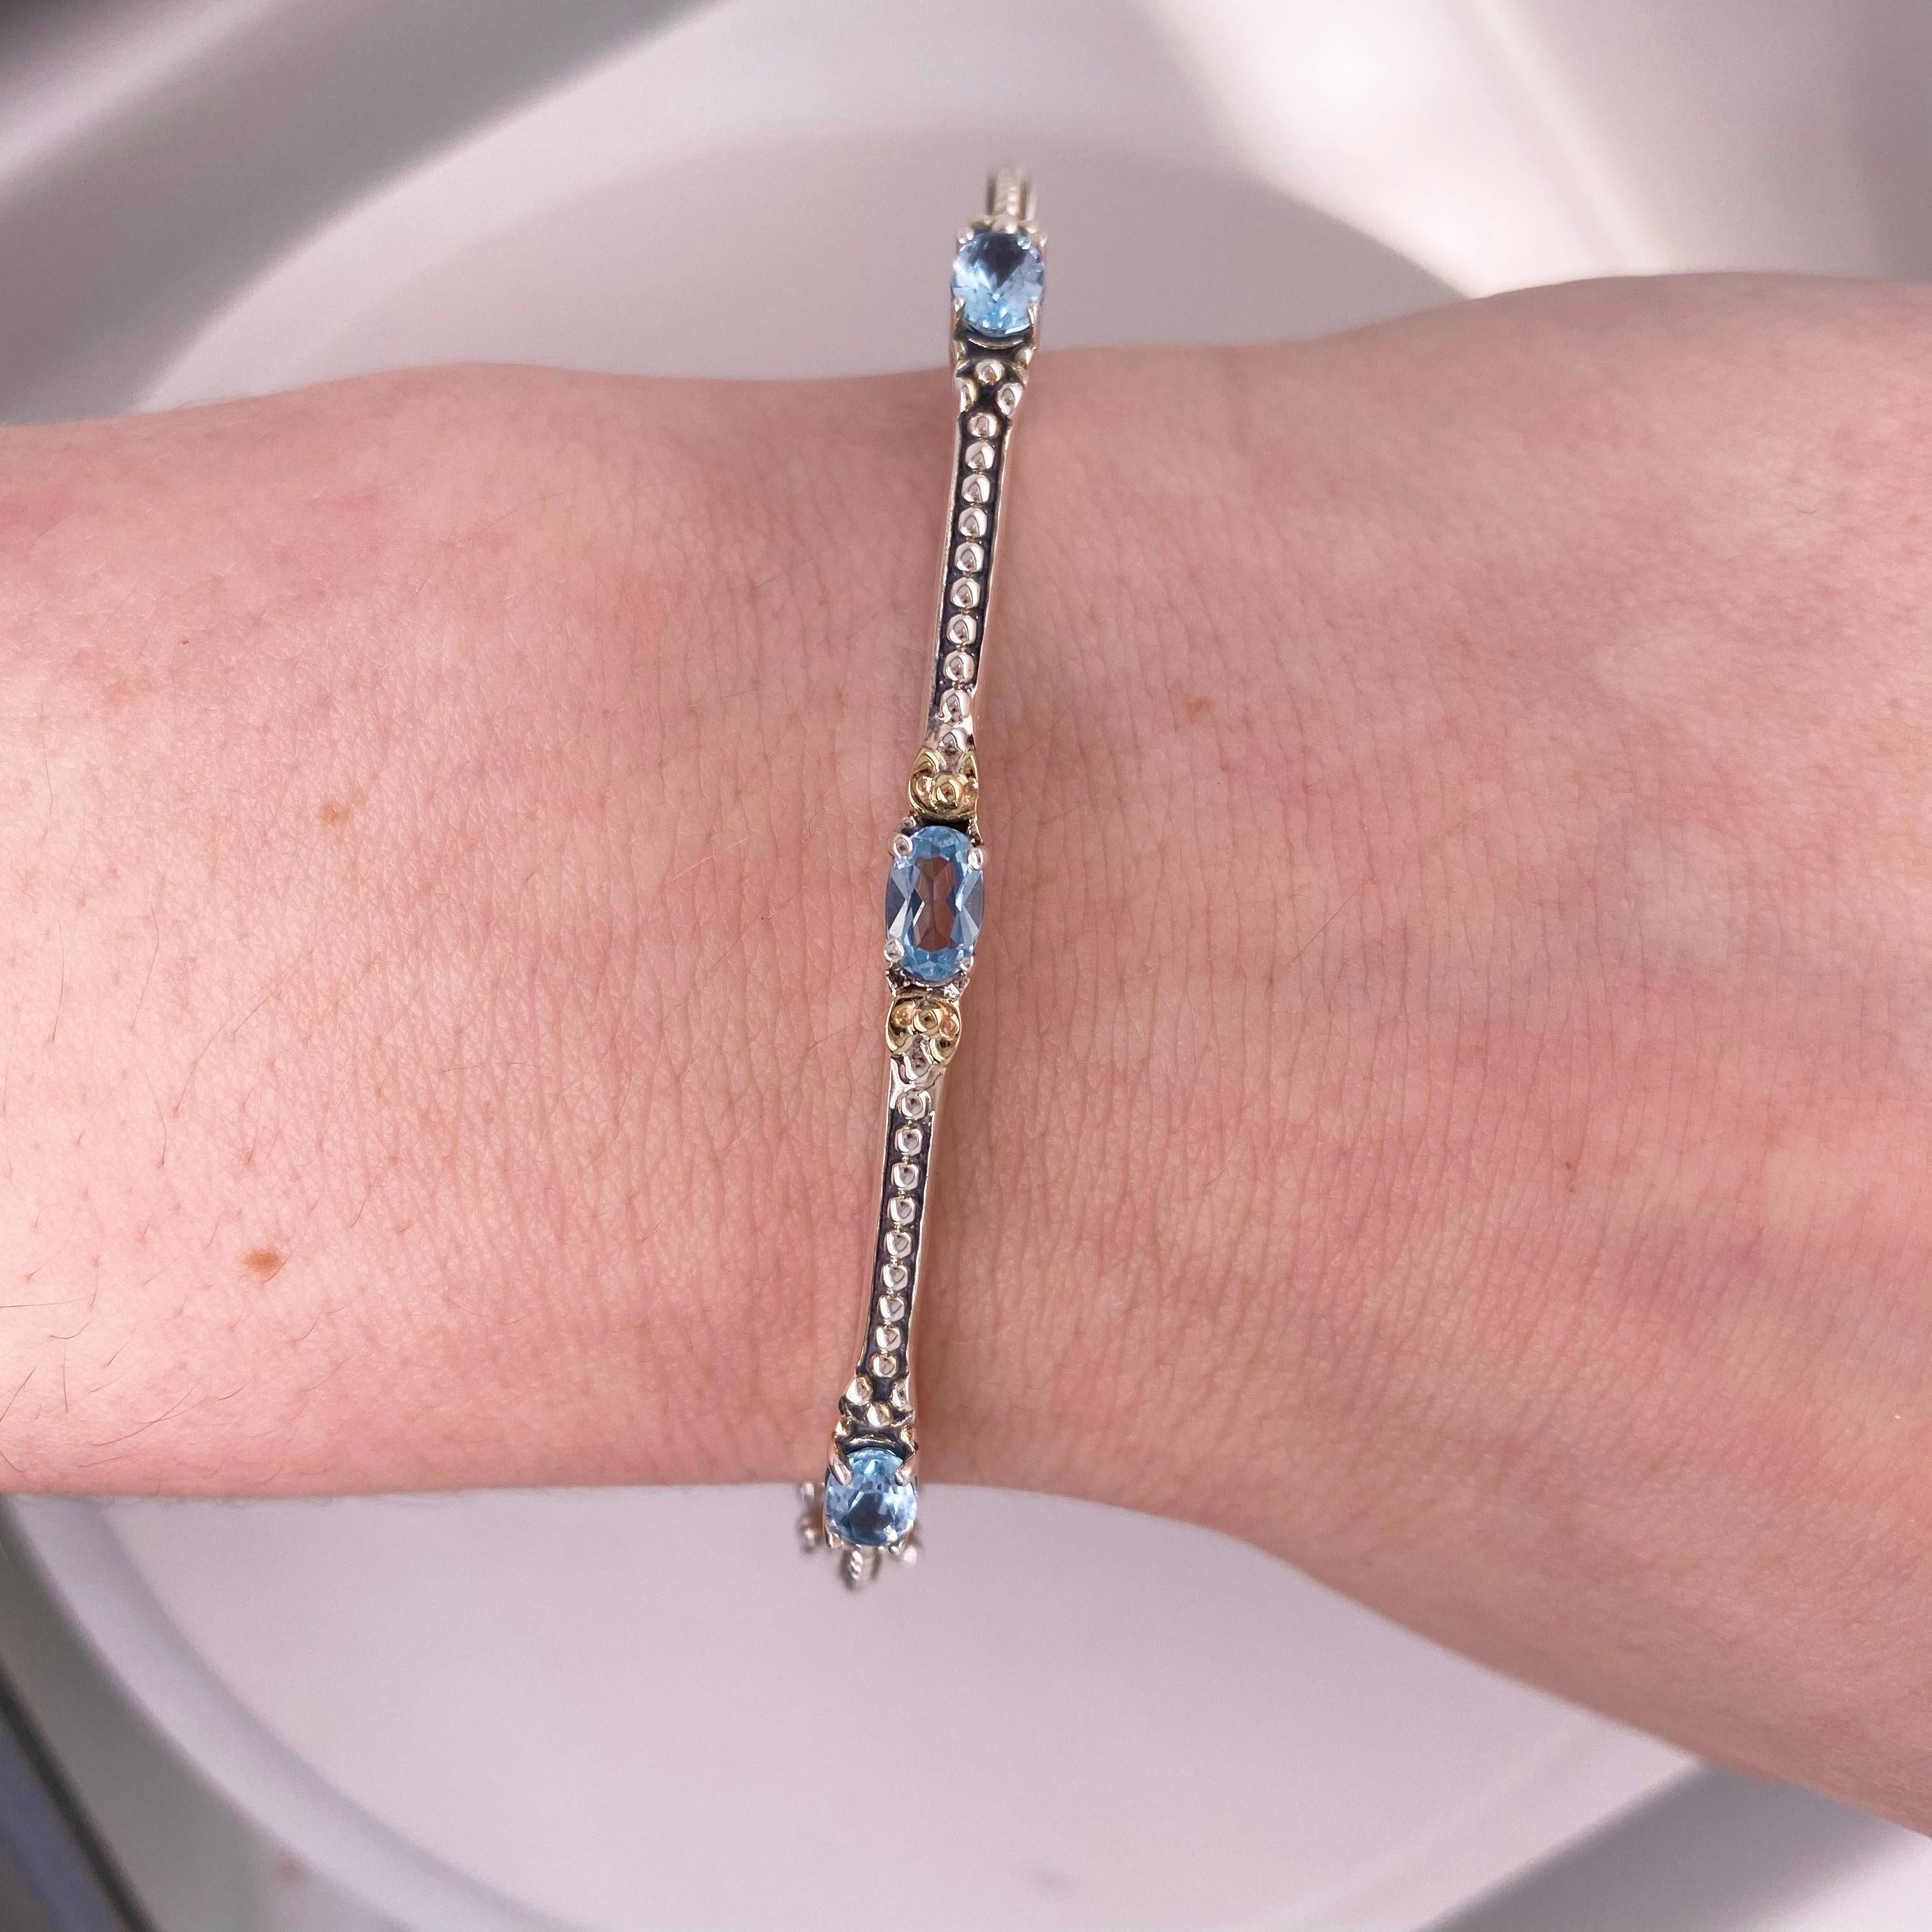 Artisan Blue Topaz Bracelet Mixed Metal Bangle and Bead Accents